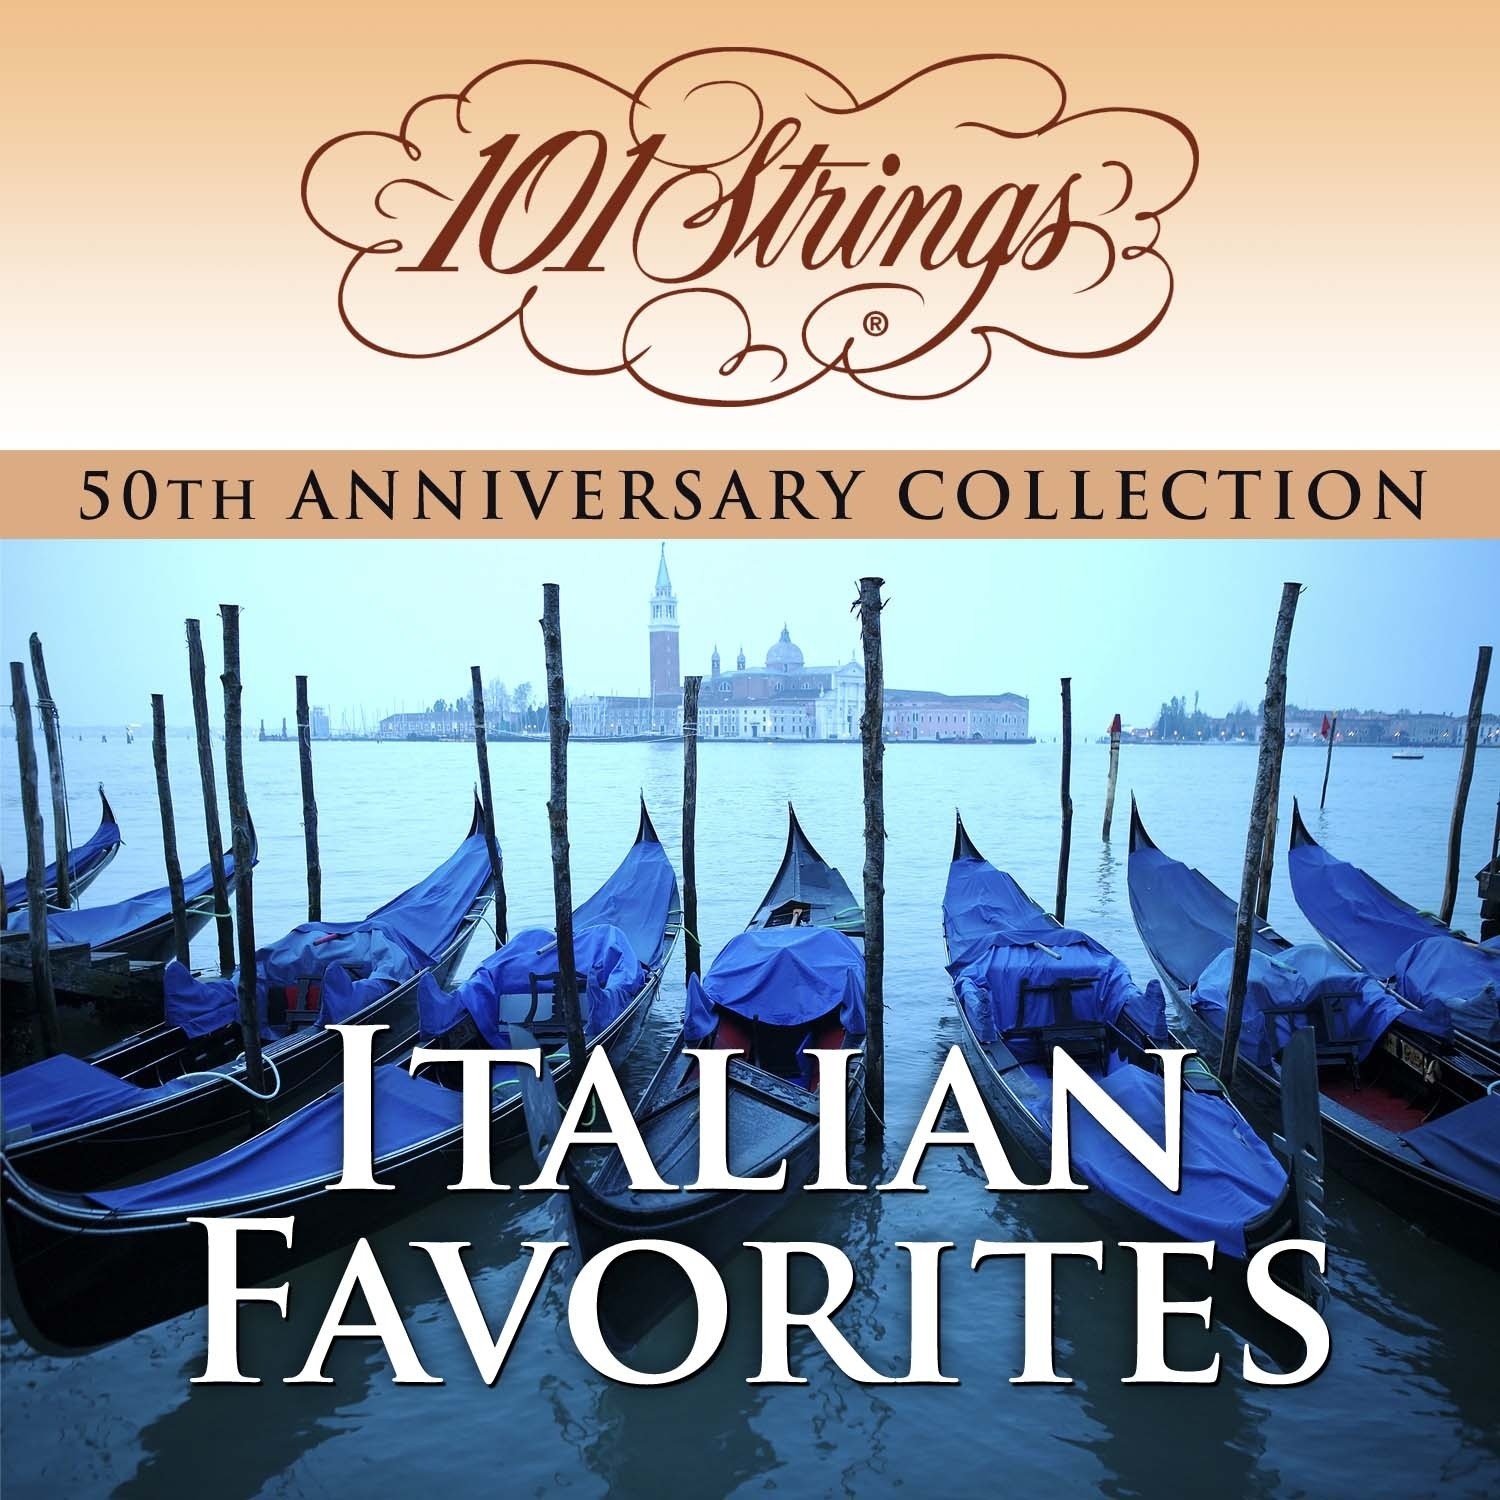 101 Strings Orchestra - Italian Favorites "50th Anniversary Collection" (Amazon Exclusive Edition)